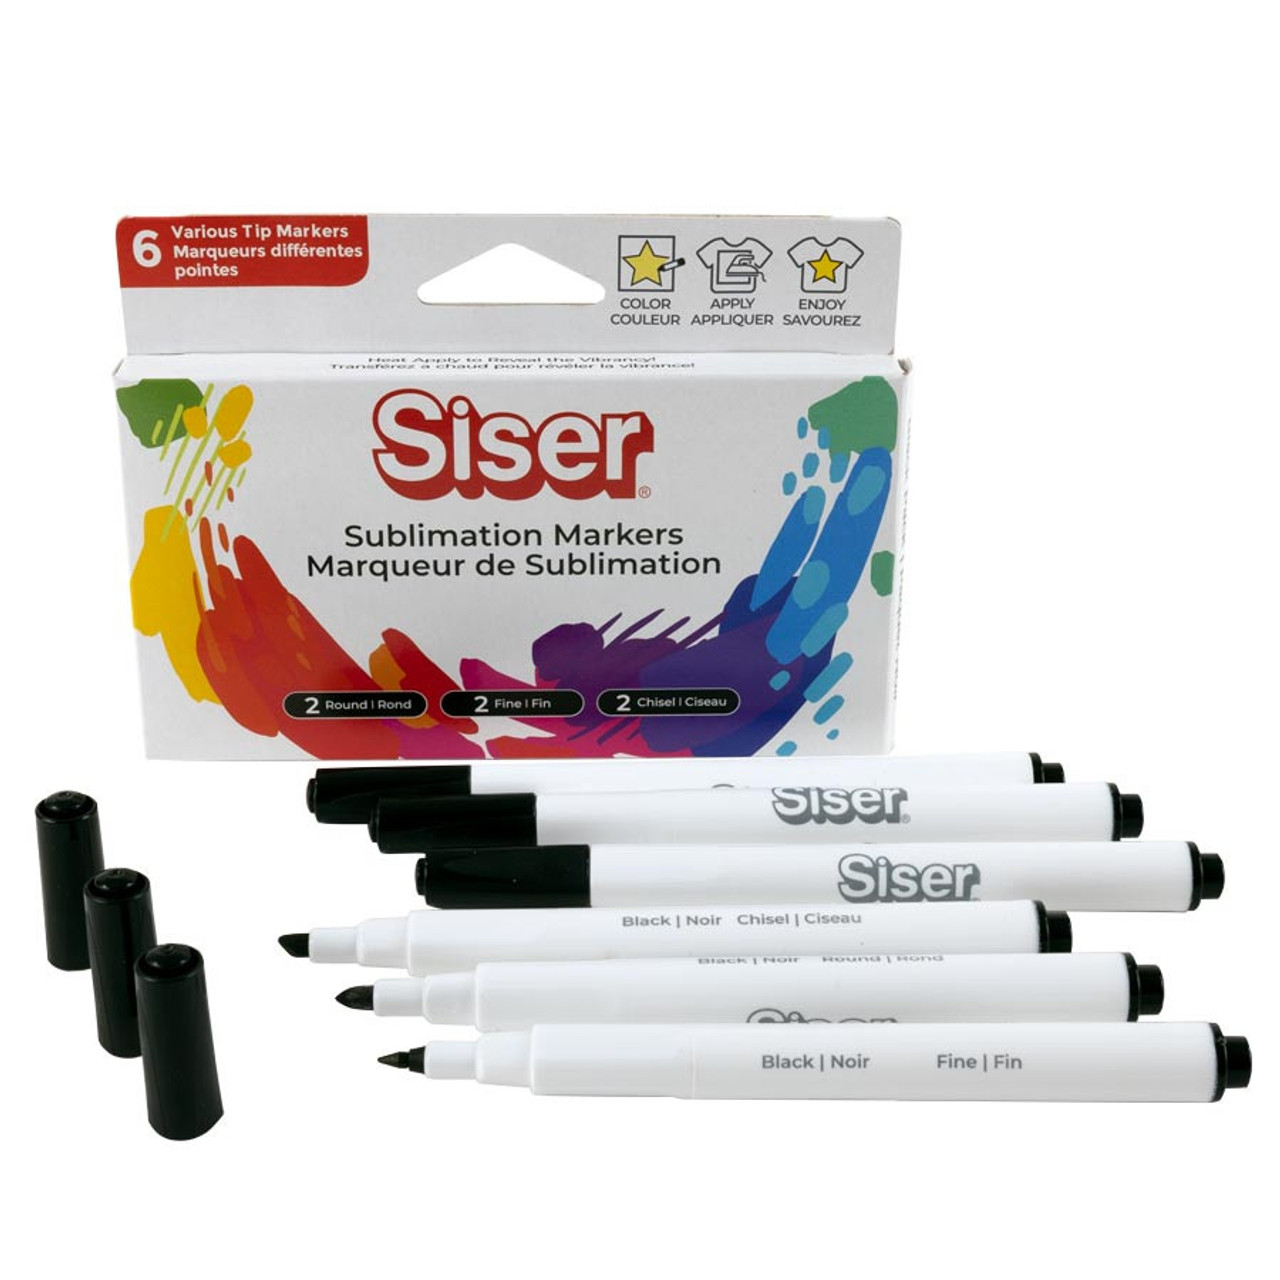 Siser Sublimation Marker Pen Pack in Black Ink Includes Fine, Round, and  Chisel Tips